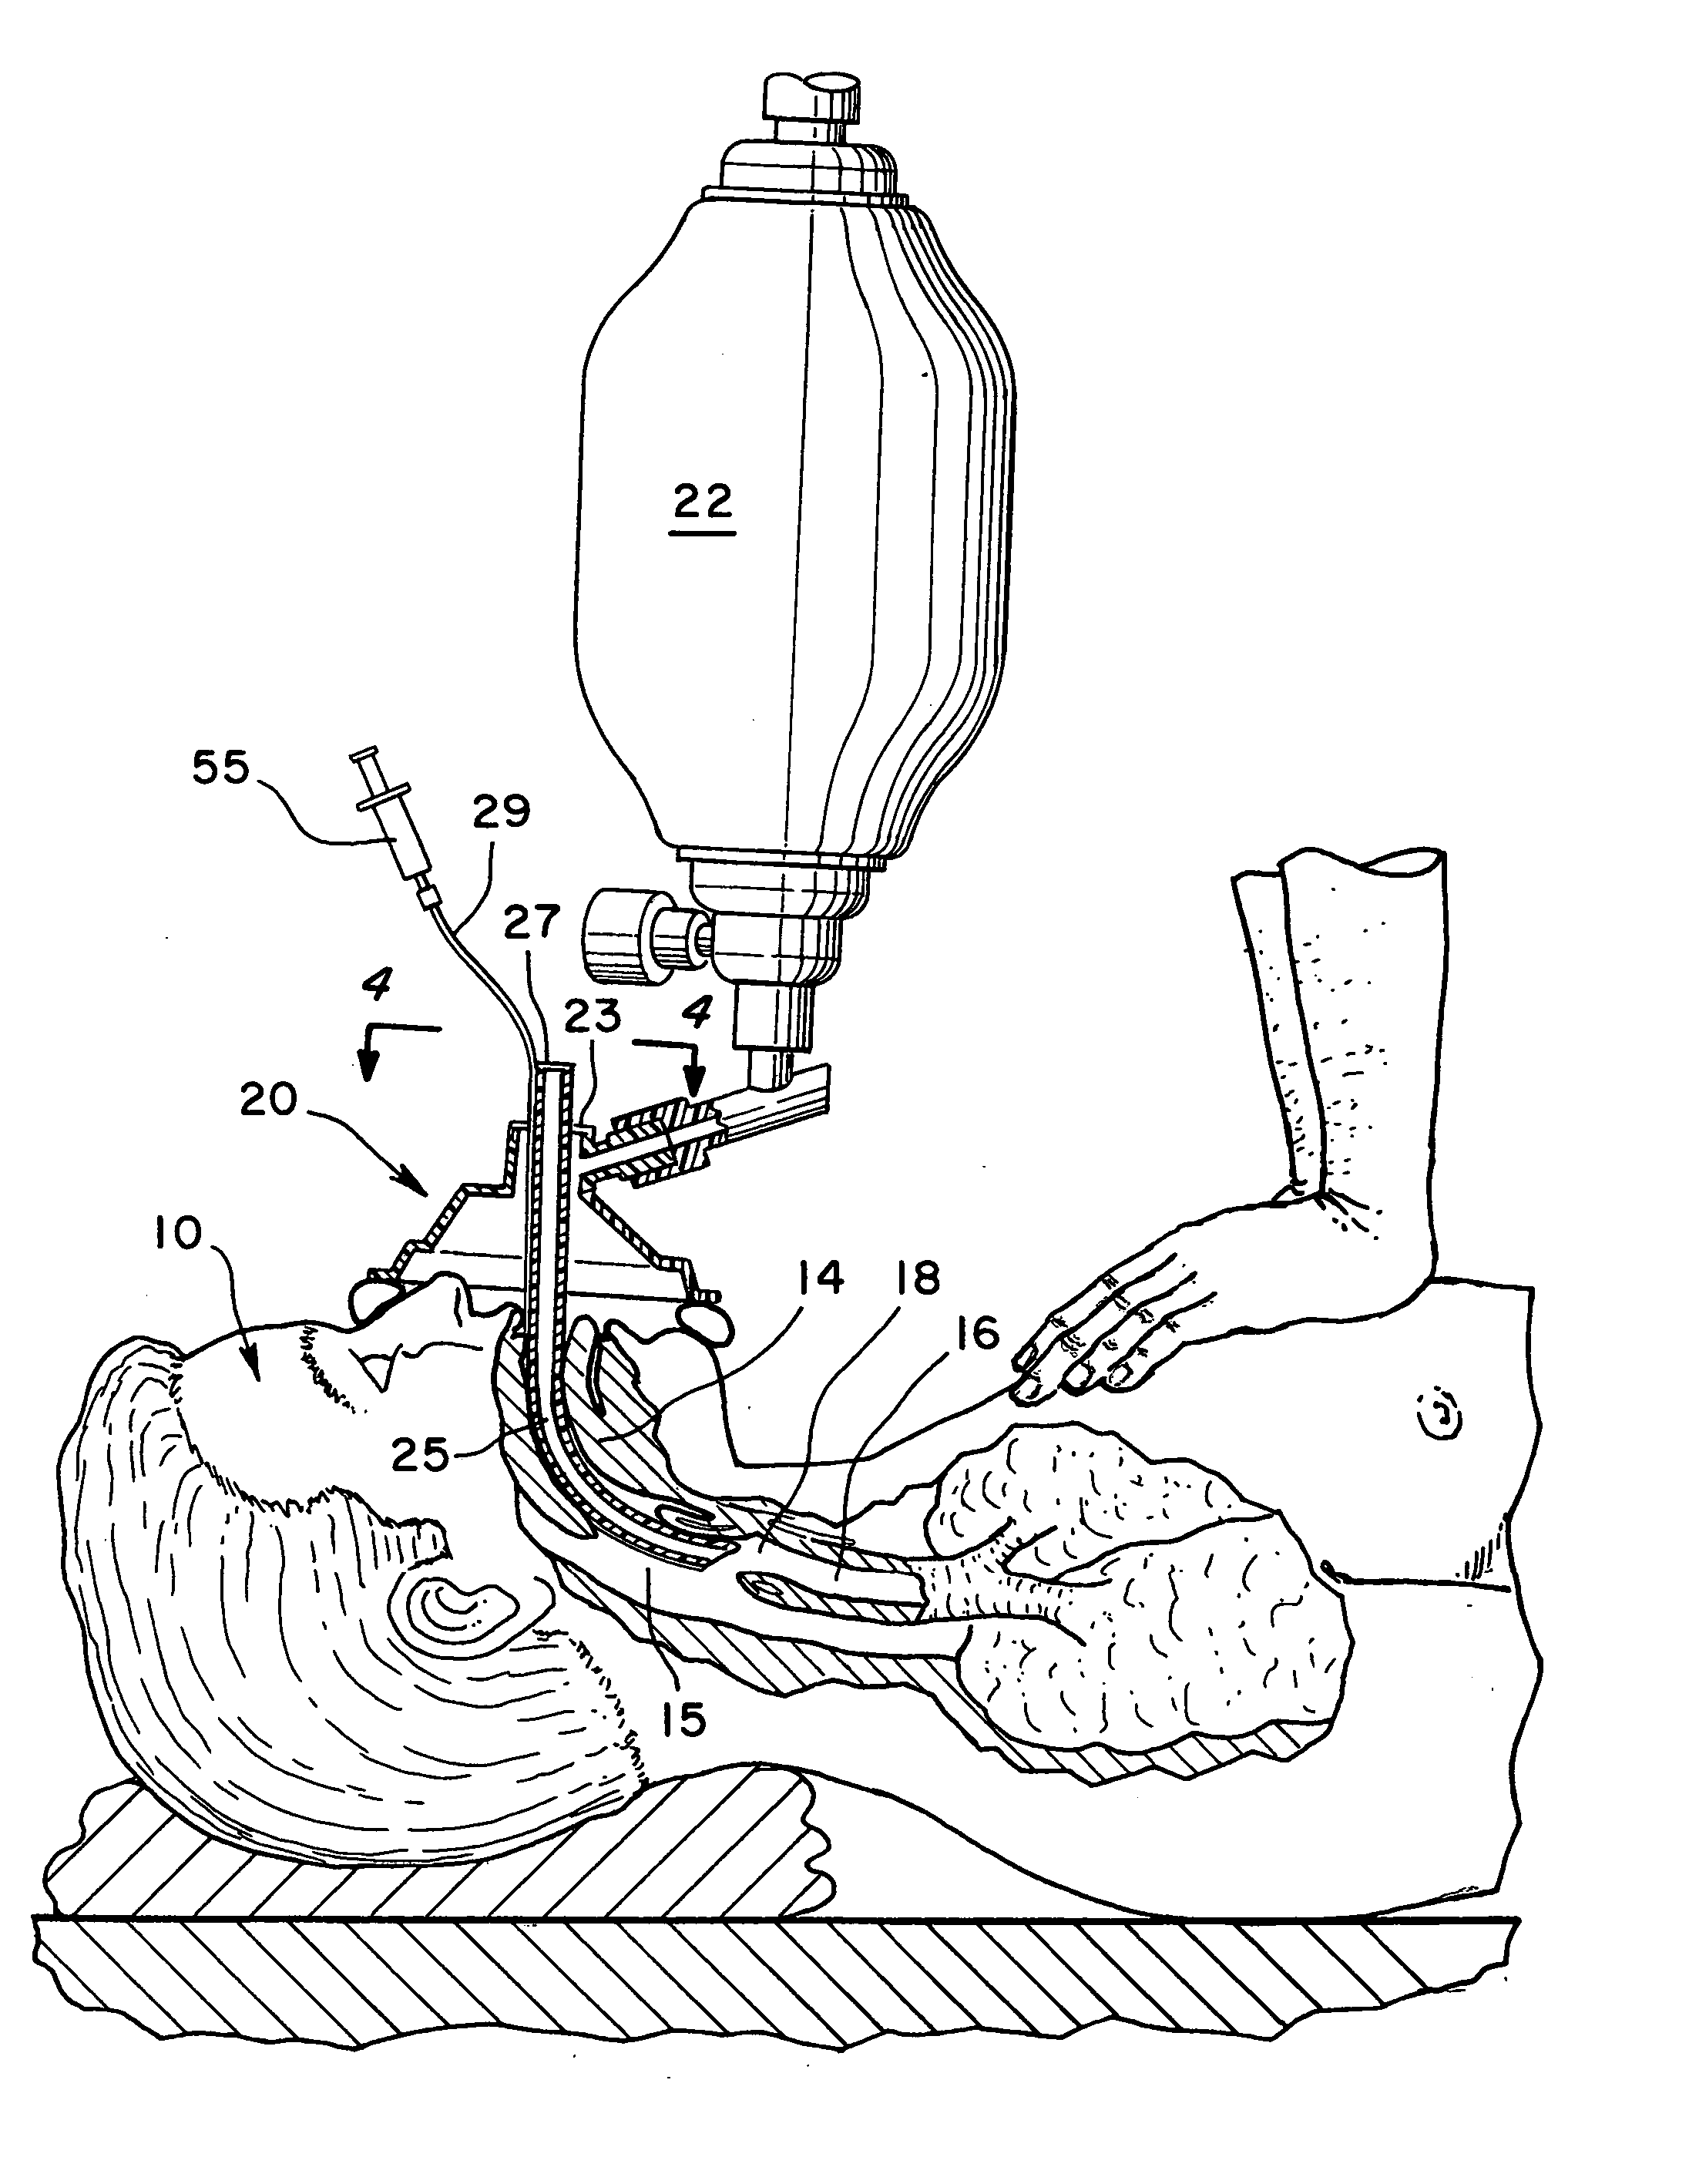 Method and apparatus for ventilation / oxygenation during guided insertion of an endotracheal tube